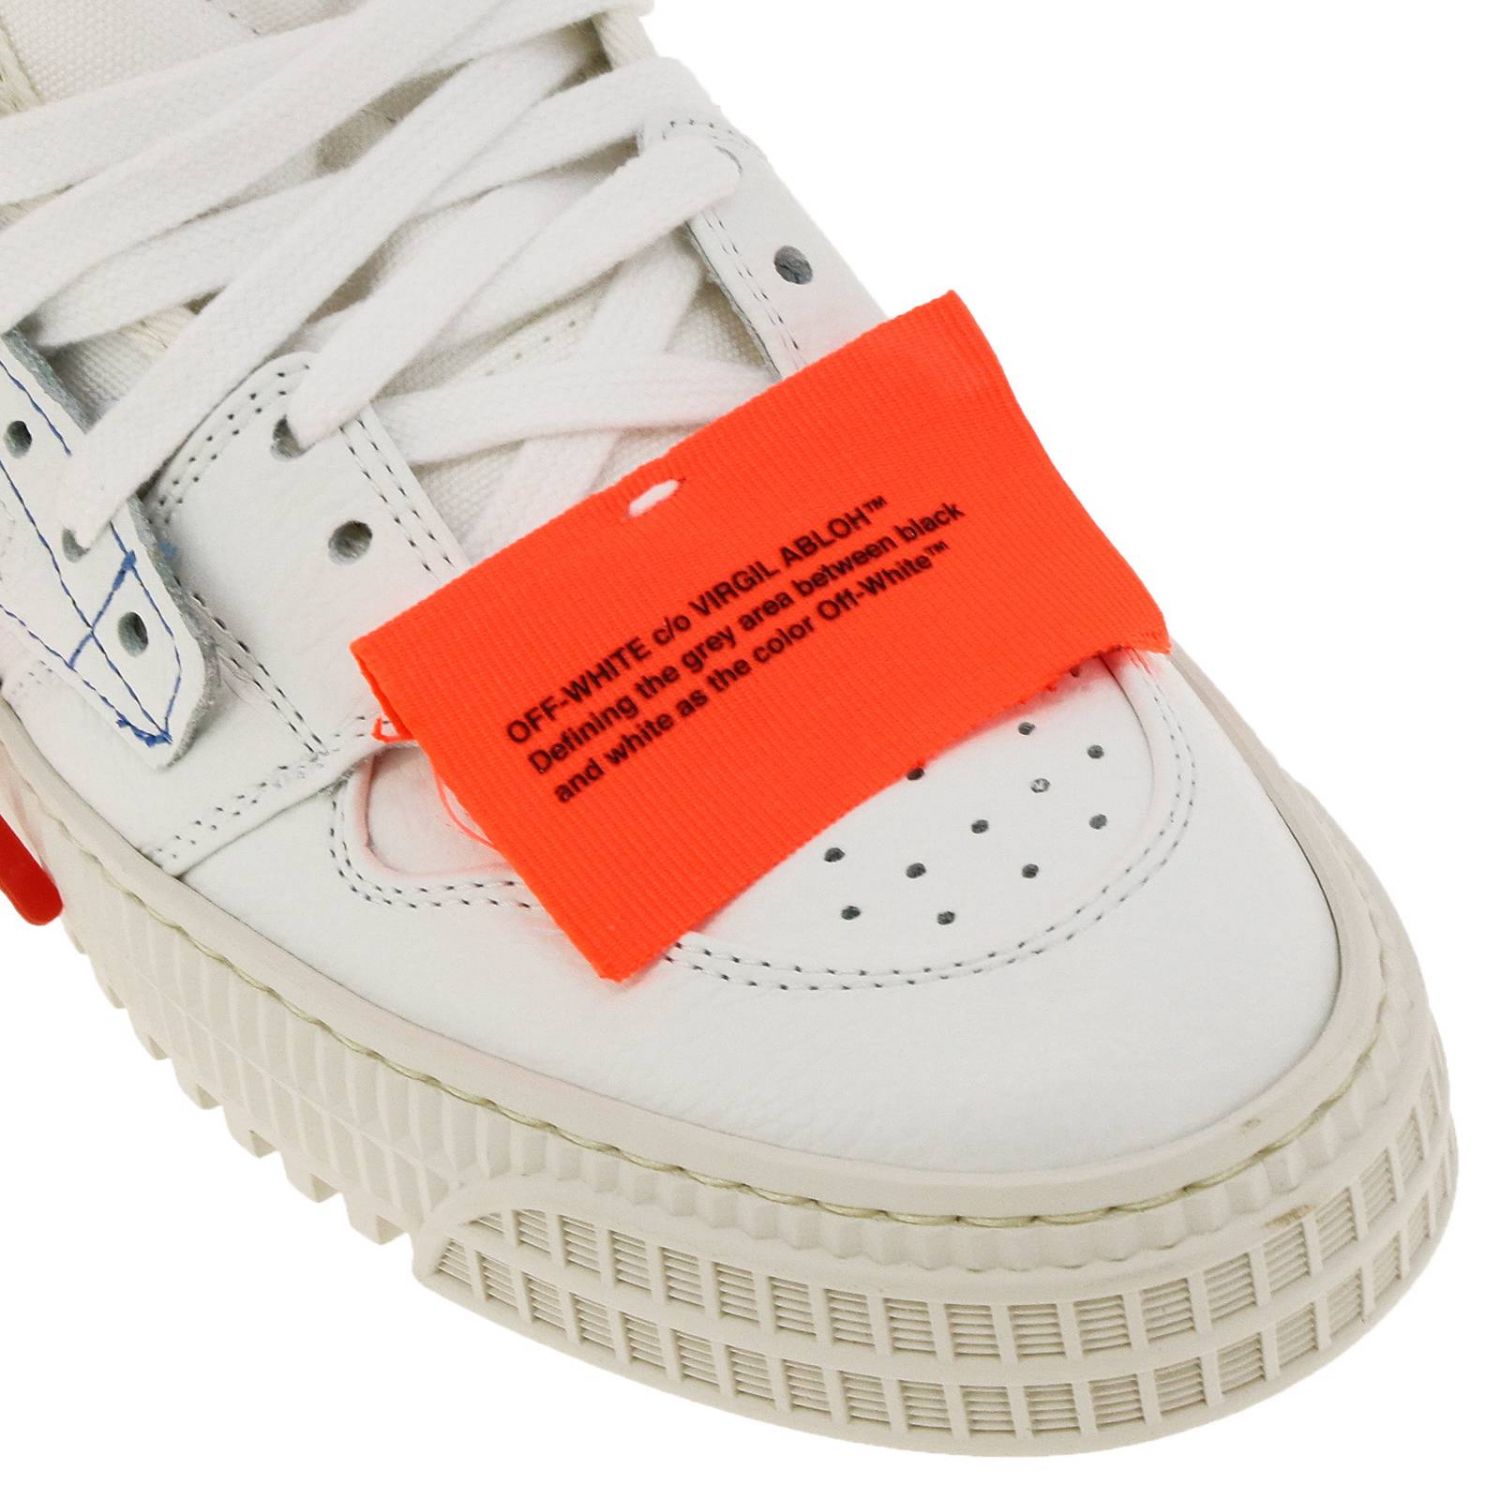 OFF WHITE: Shoes women | Sneakers Off White Women White | Sneakers Off ...